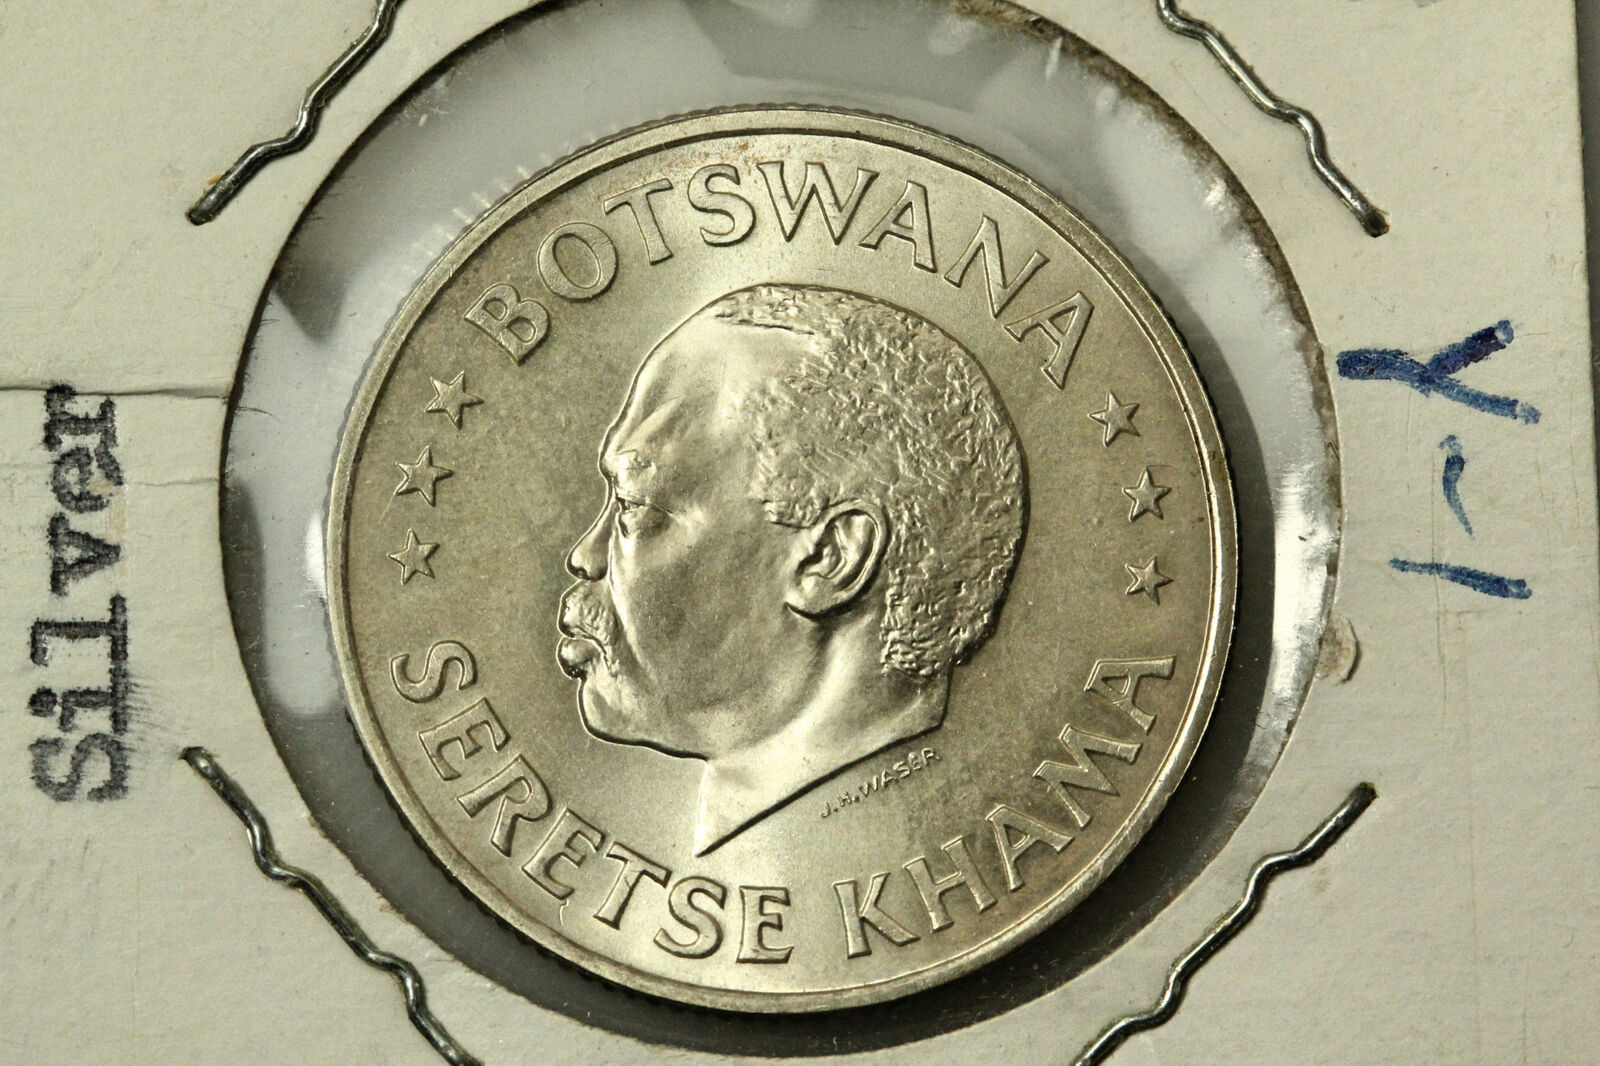 1966 Botswana Independence 50 Cents 80% Silver Coin Grades Mint State (num6492)